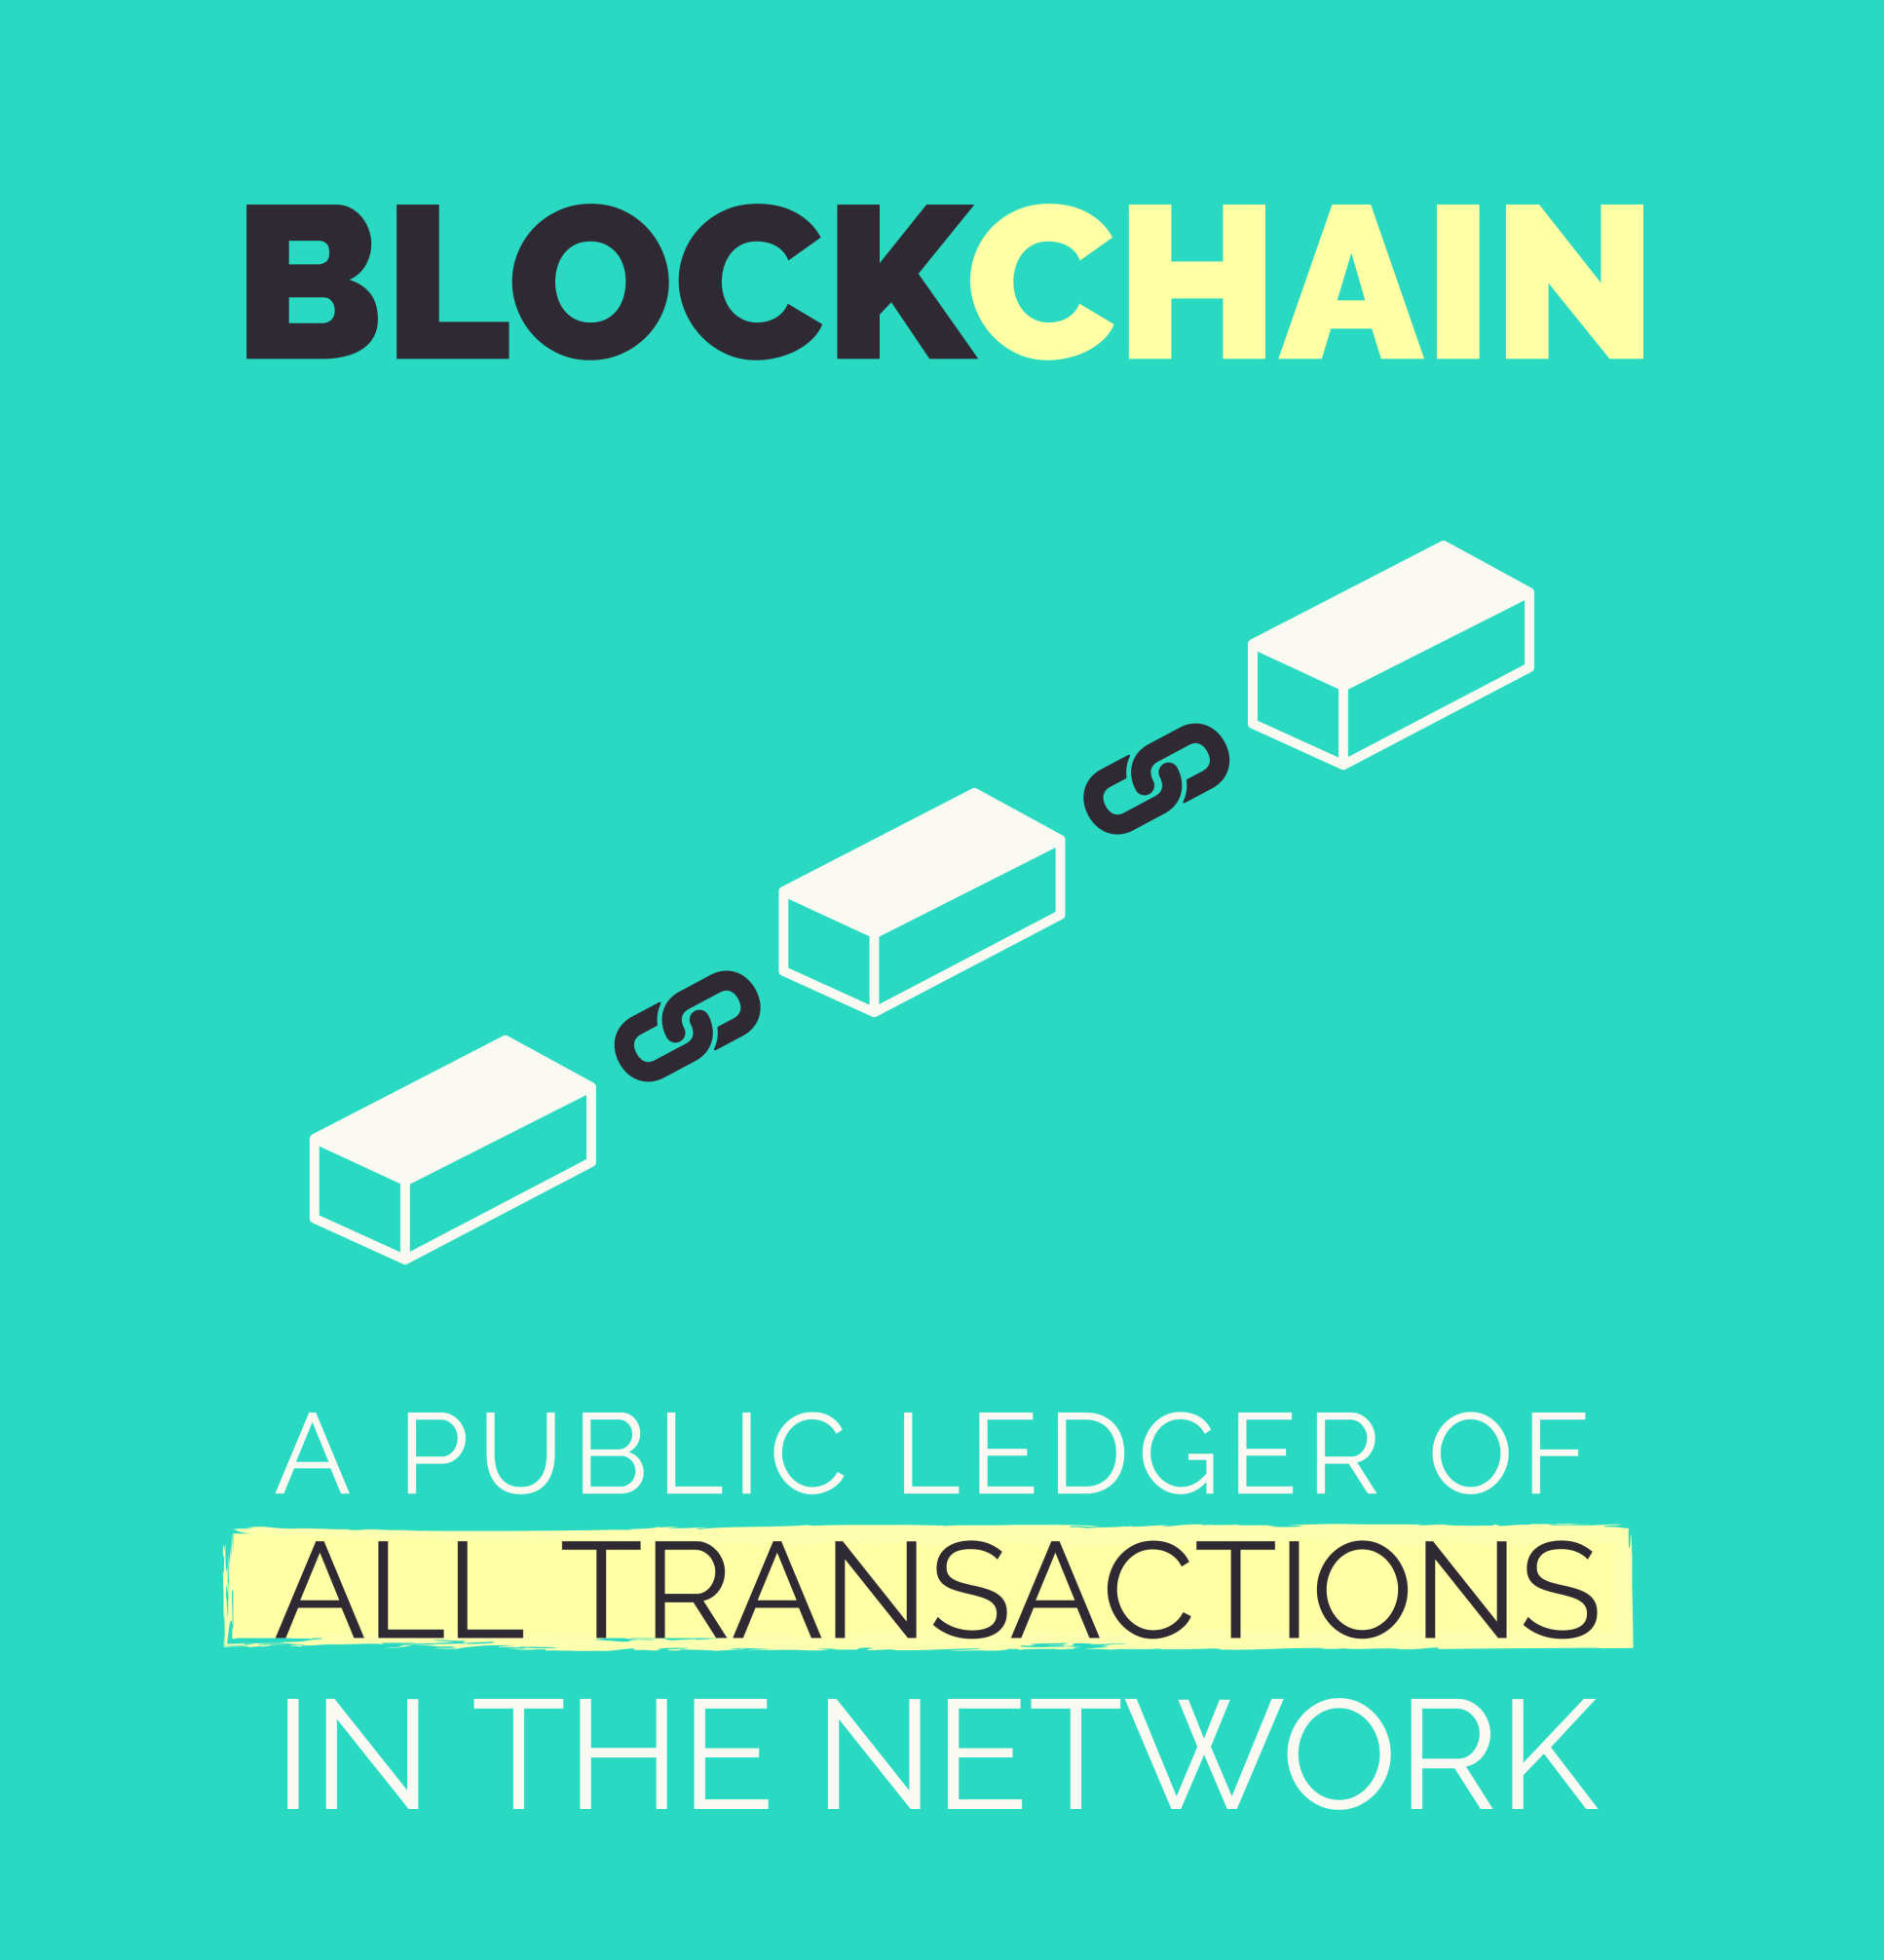 Illustration caption: Blockchain - a public ledger of all transactions in the network